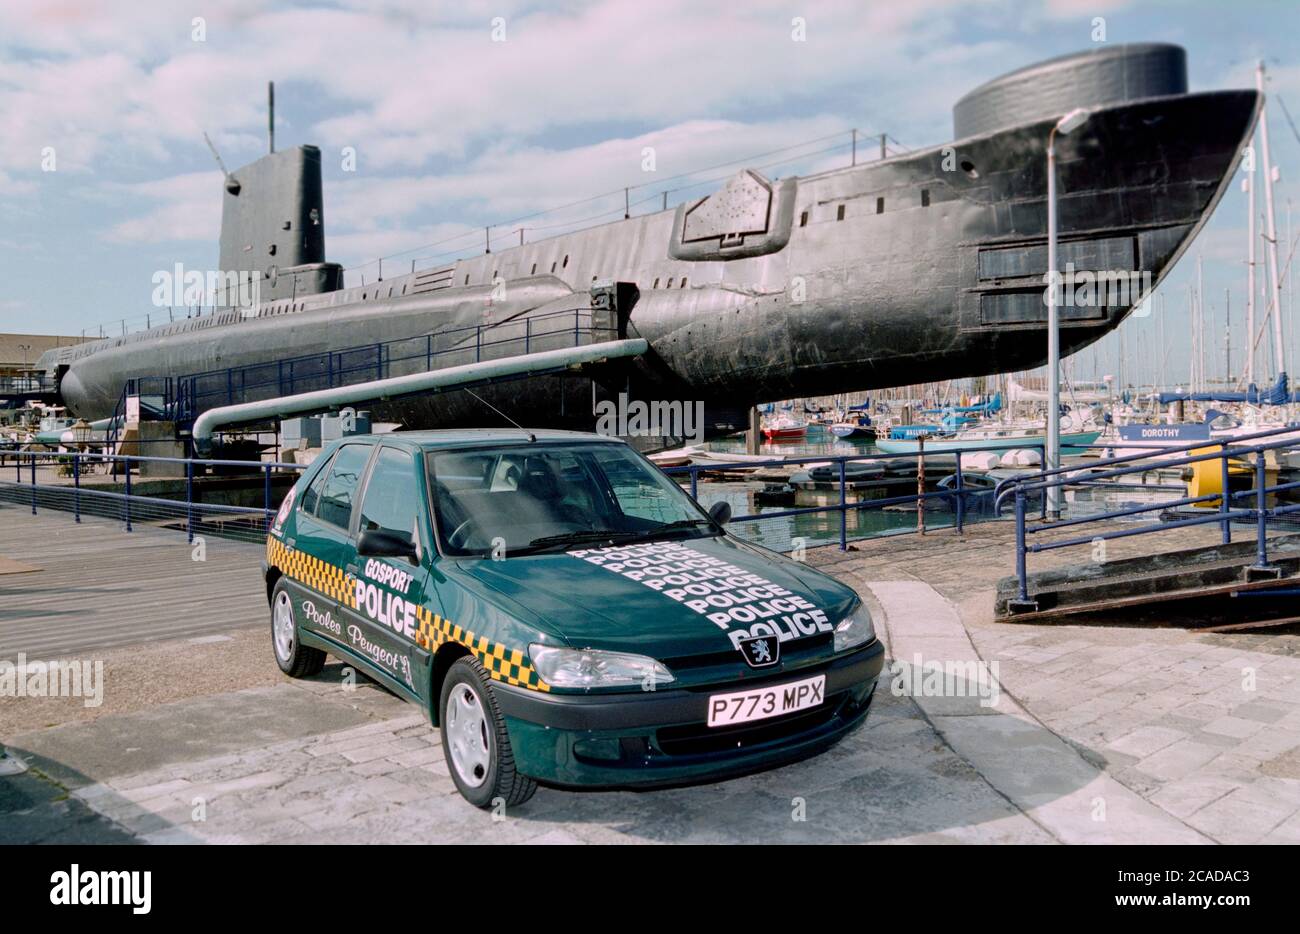 A sponsored community police car on display at the Royal Navy Submarine Museum at Gosport, Hampshire, England, UK - museum exhibit HMS Alliance is in the background. Stock Photo